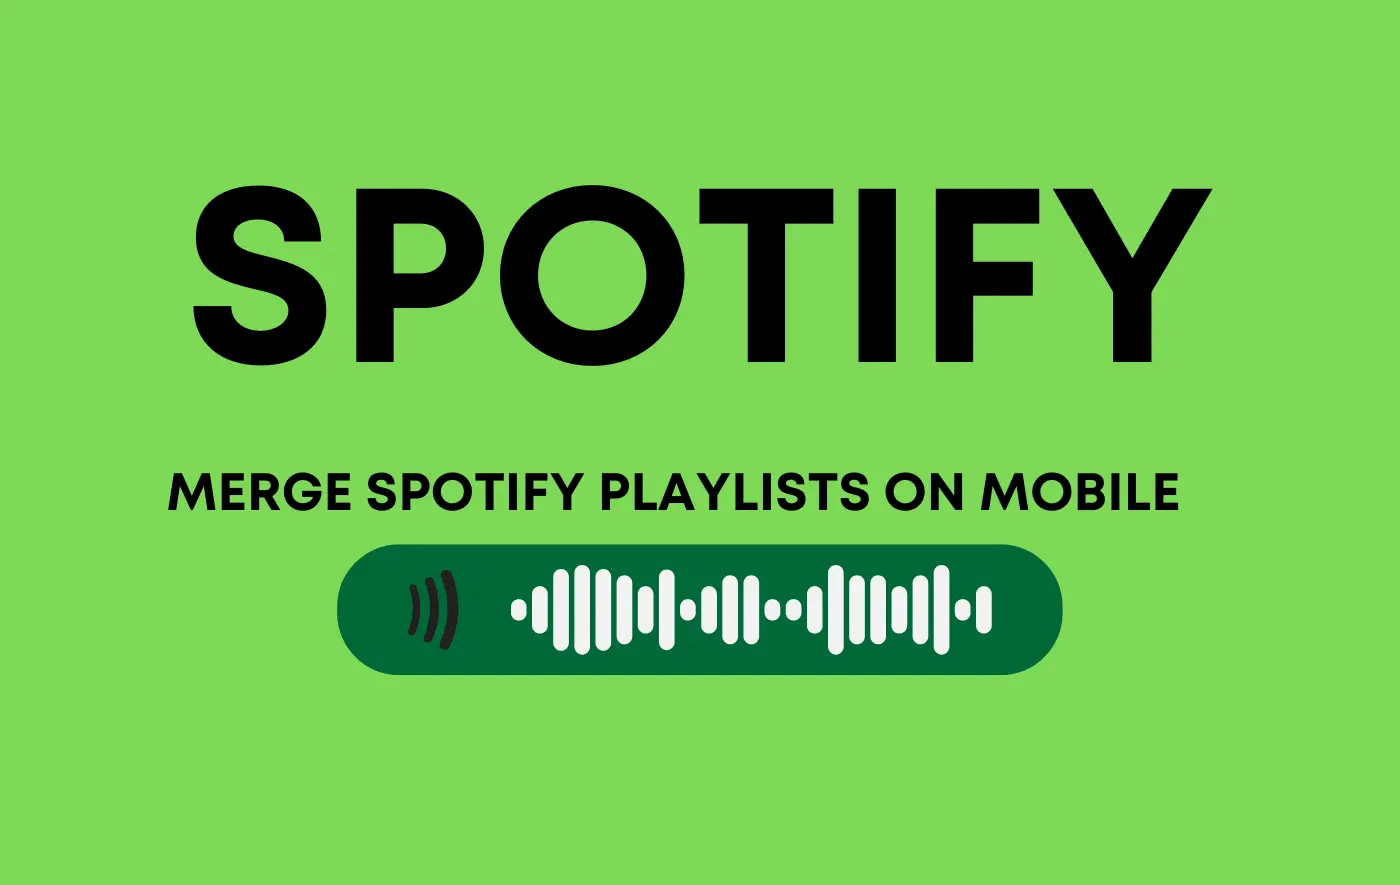 How to Merge Spotify Playlists on Mobile